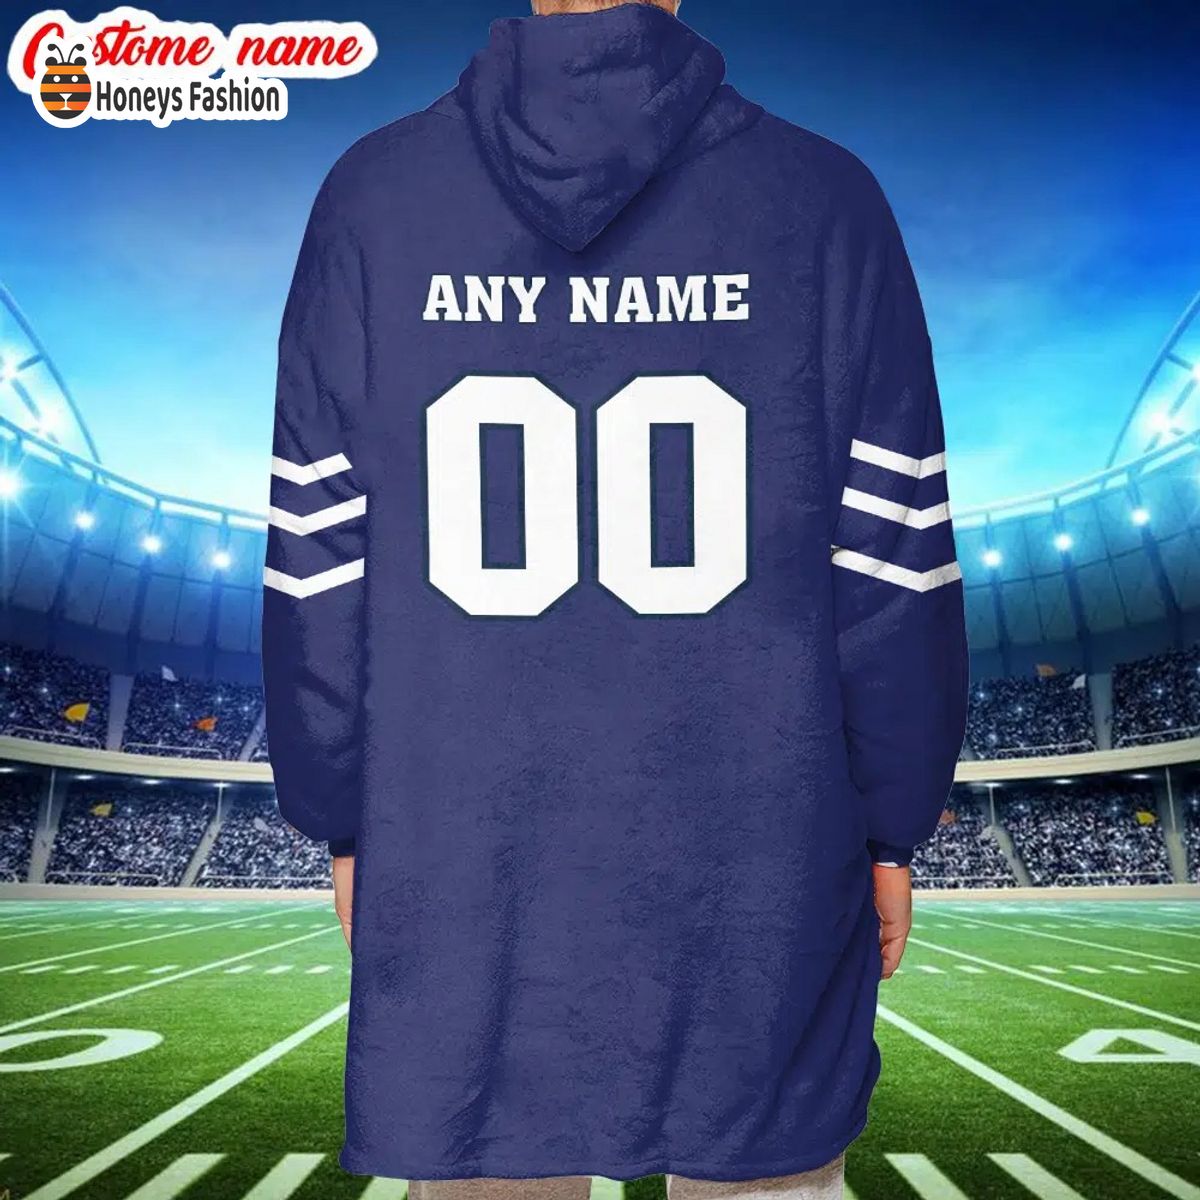 New York Giants NFL Adidas all day i dream about Giants blanket hoodie